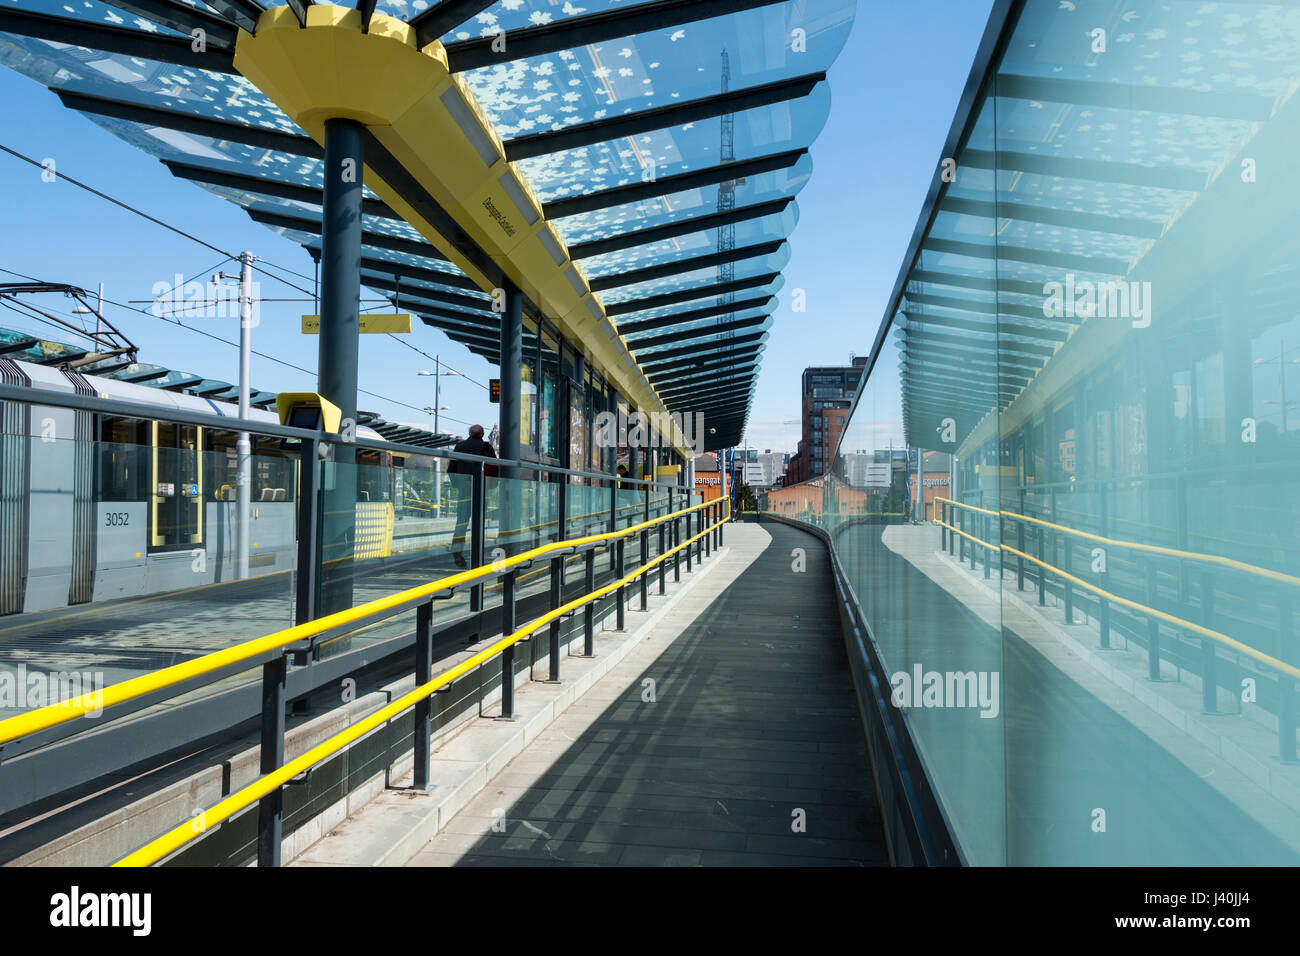 Metrolink tram and glass wall at the Deansgate-Castlefield tram stop, Manchester, England, UK Stock Photo